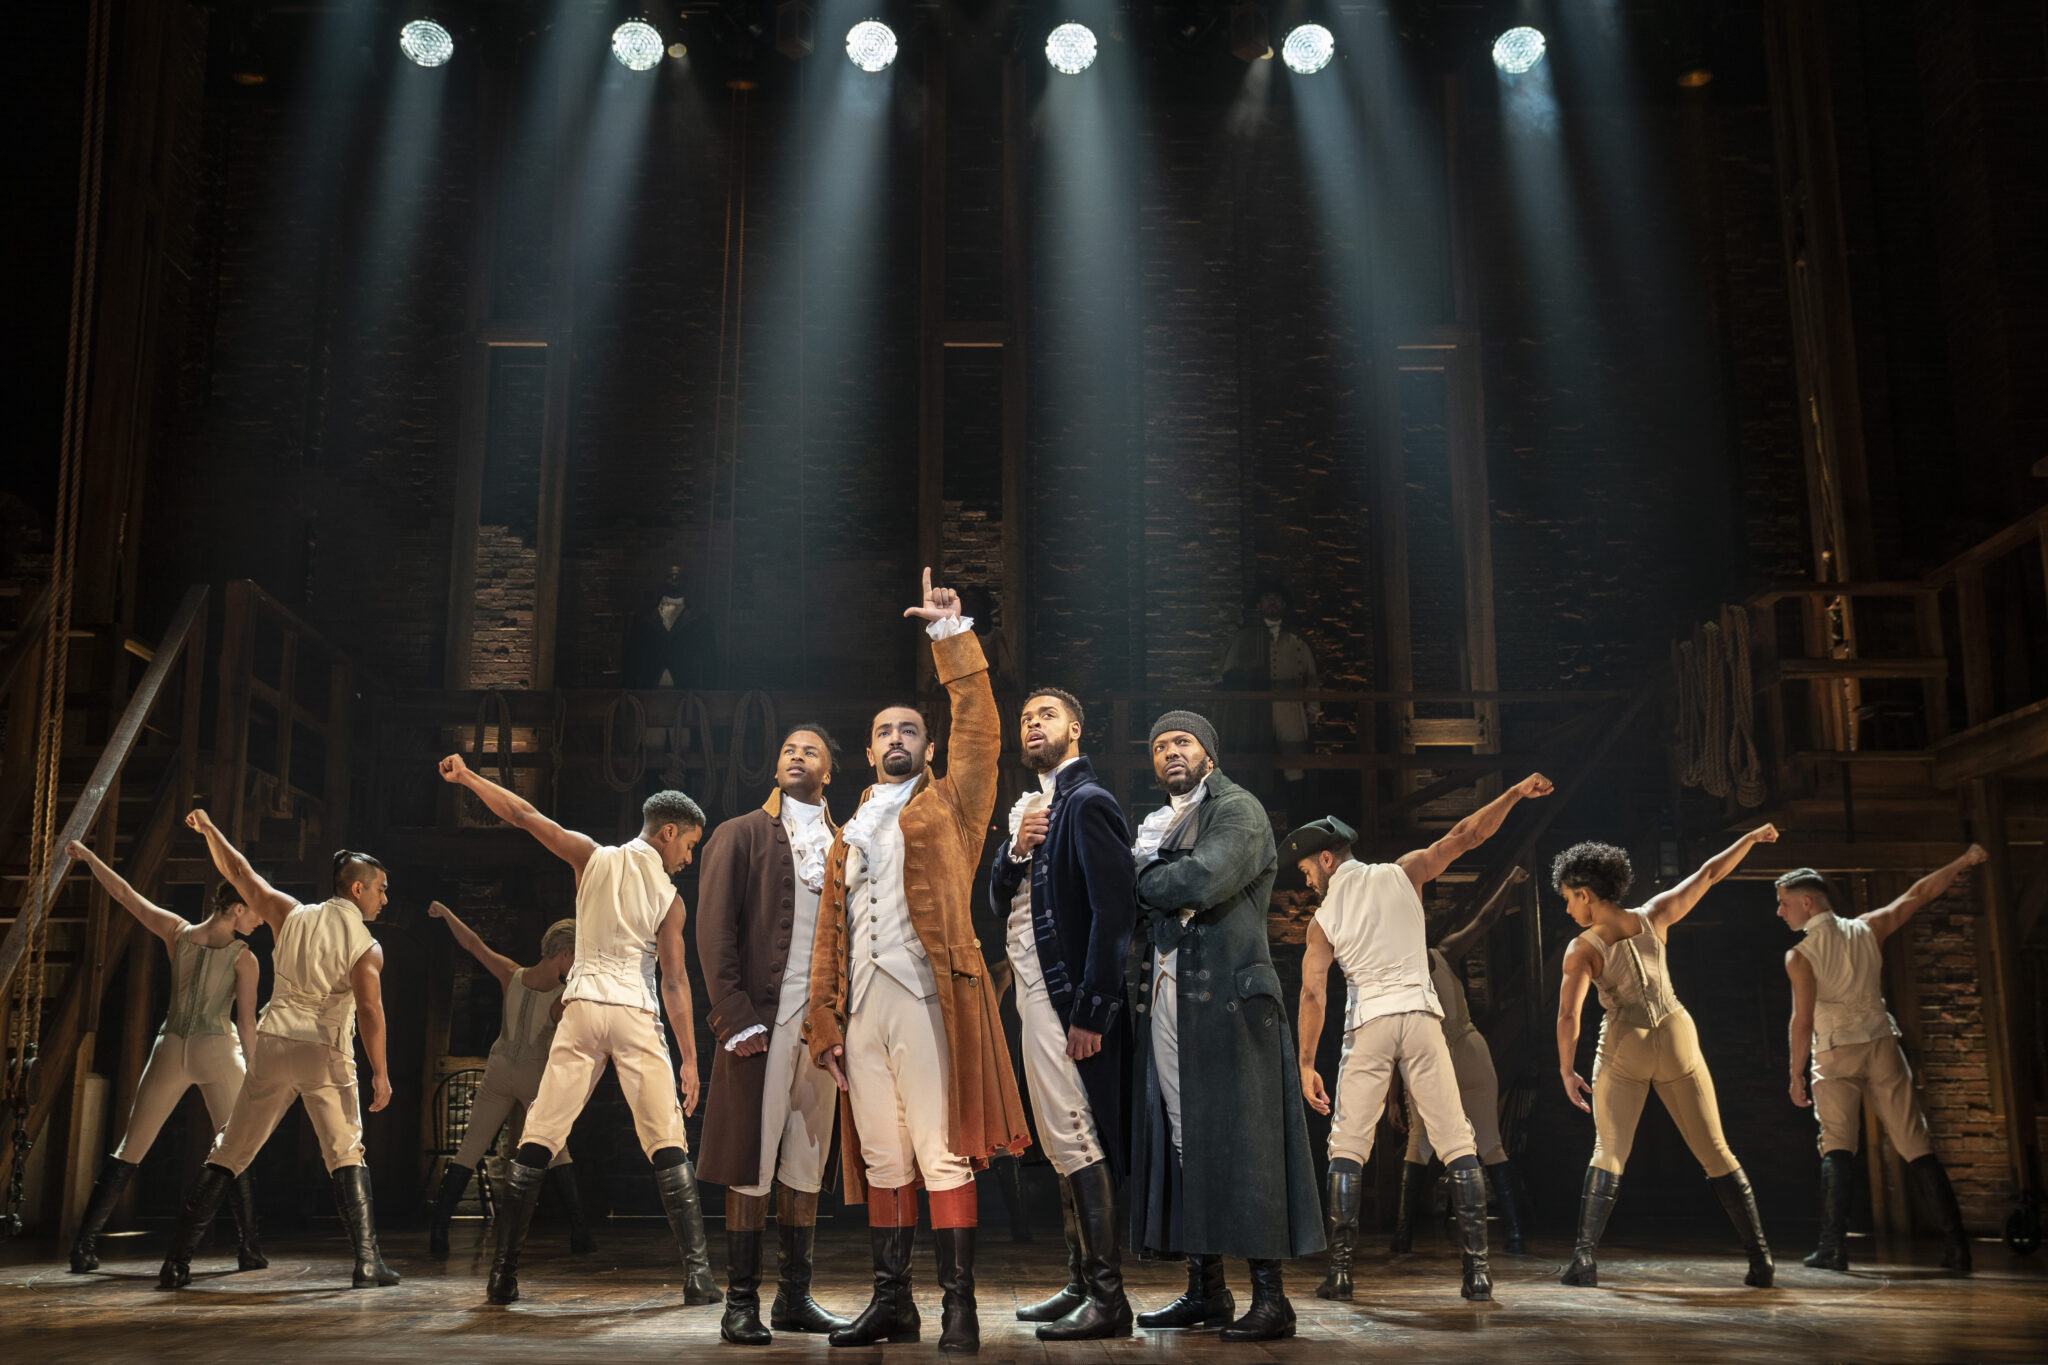 HAMILTON Musical at Fox Theater Review – MARQUEE BY MARQUIS